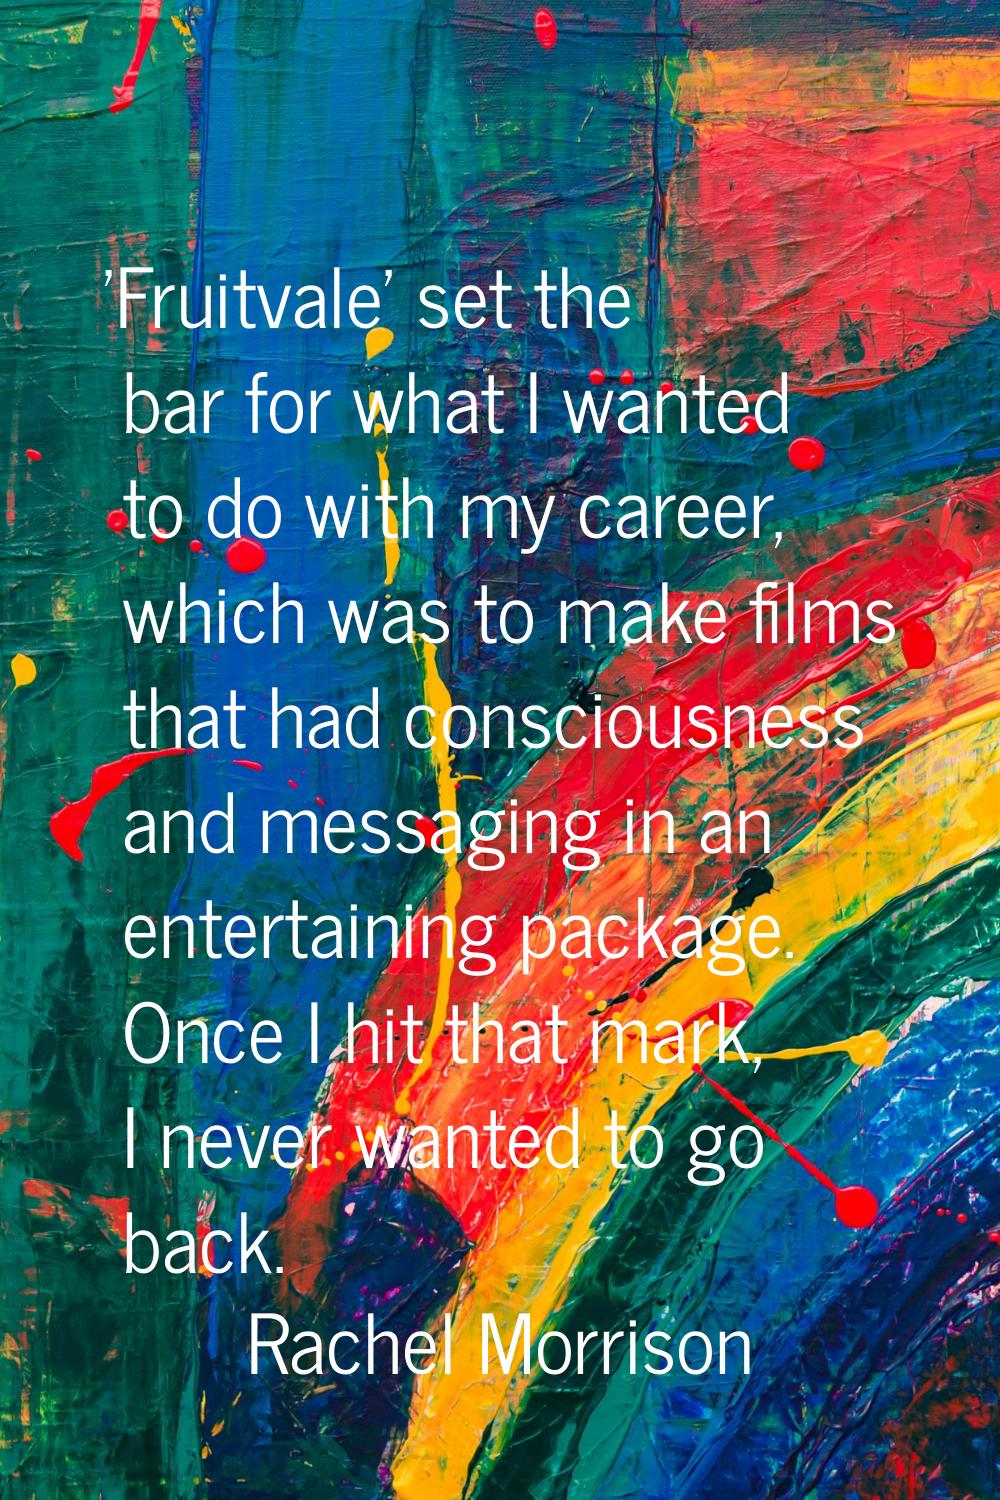 'Fruitvale' set the bar for what I wanted to do with my career, which was to make films that had co